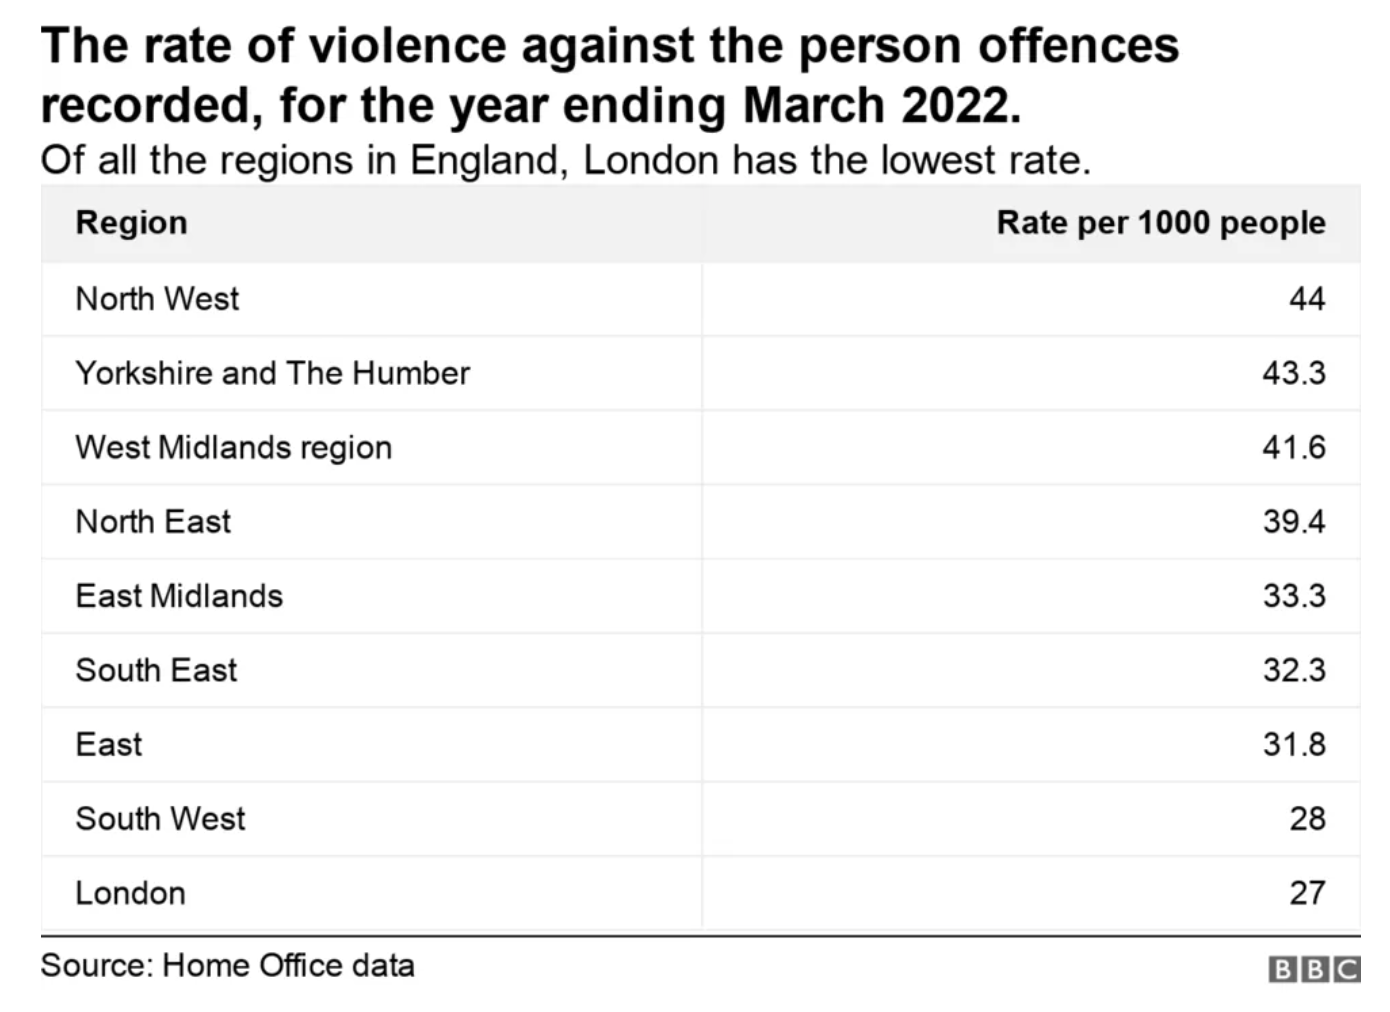 Table showing the rate of violence against the person offences in England 2022